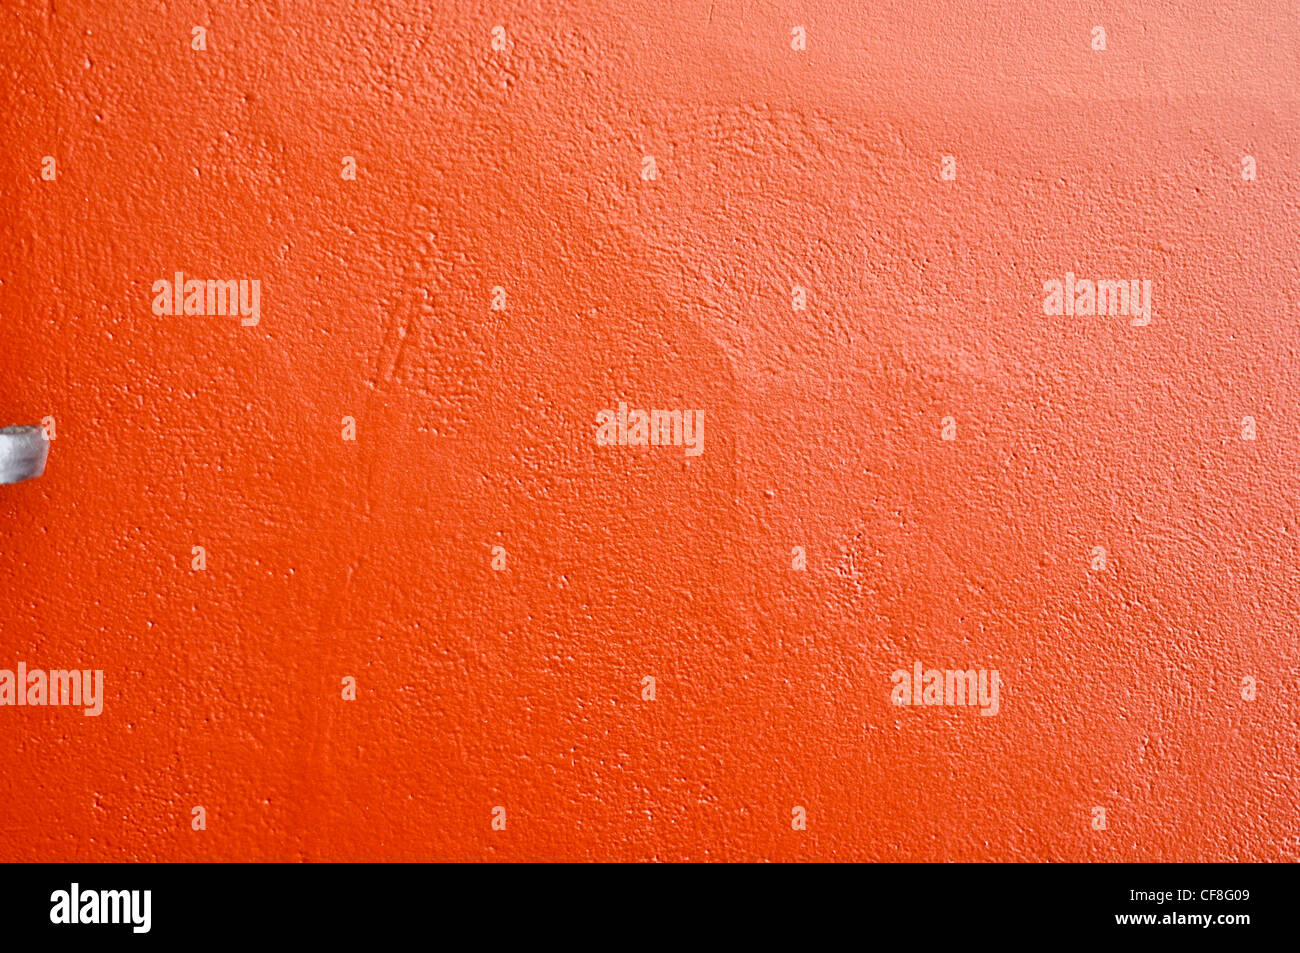 Close-up of a bright red wall painted with shiny paint Stock Photo